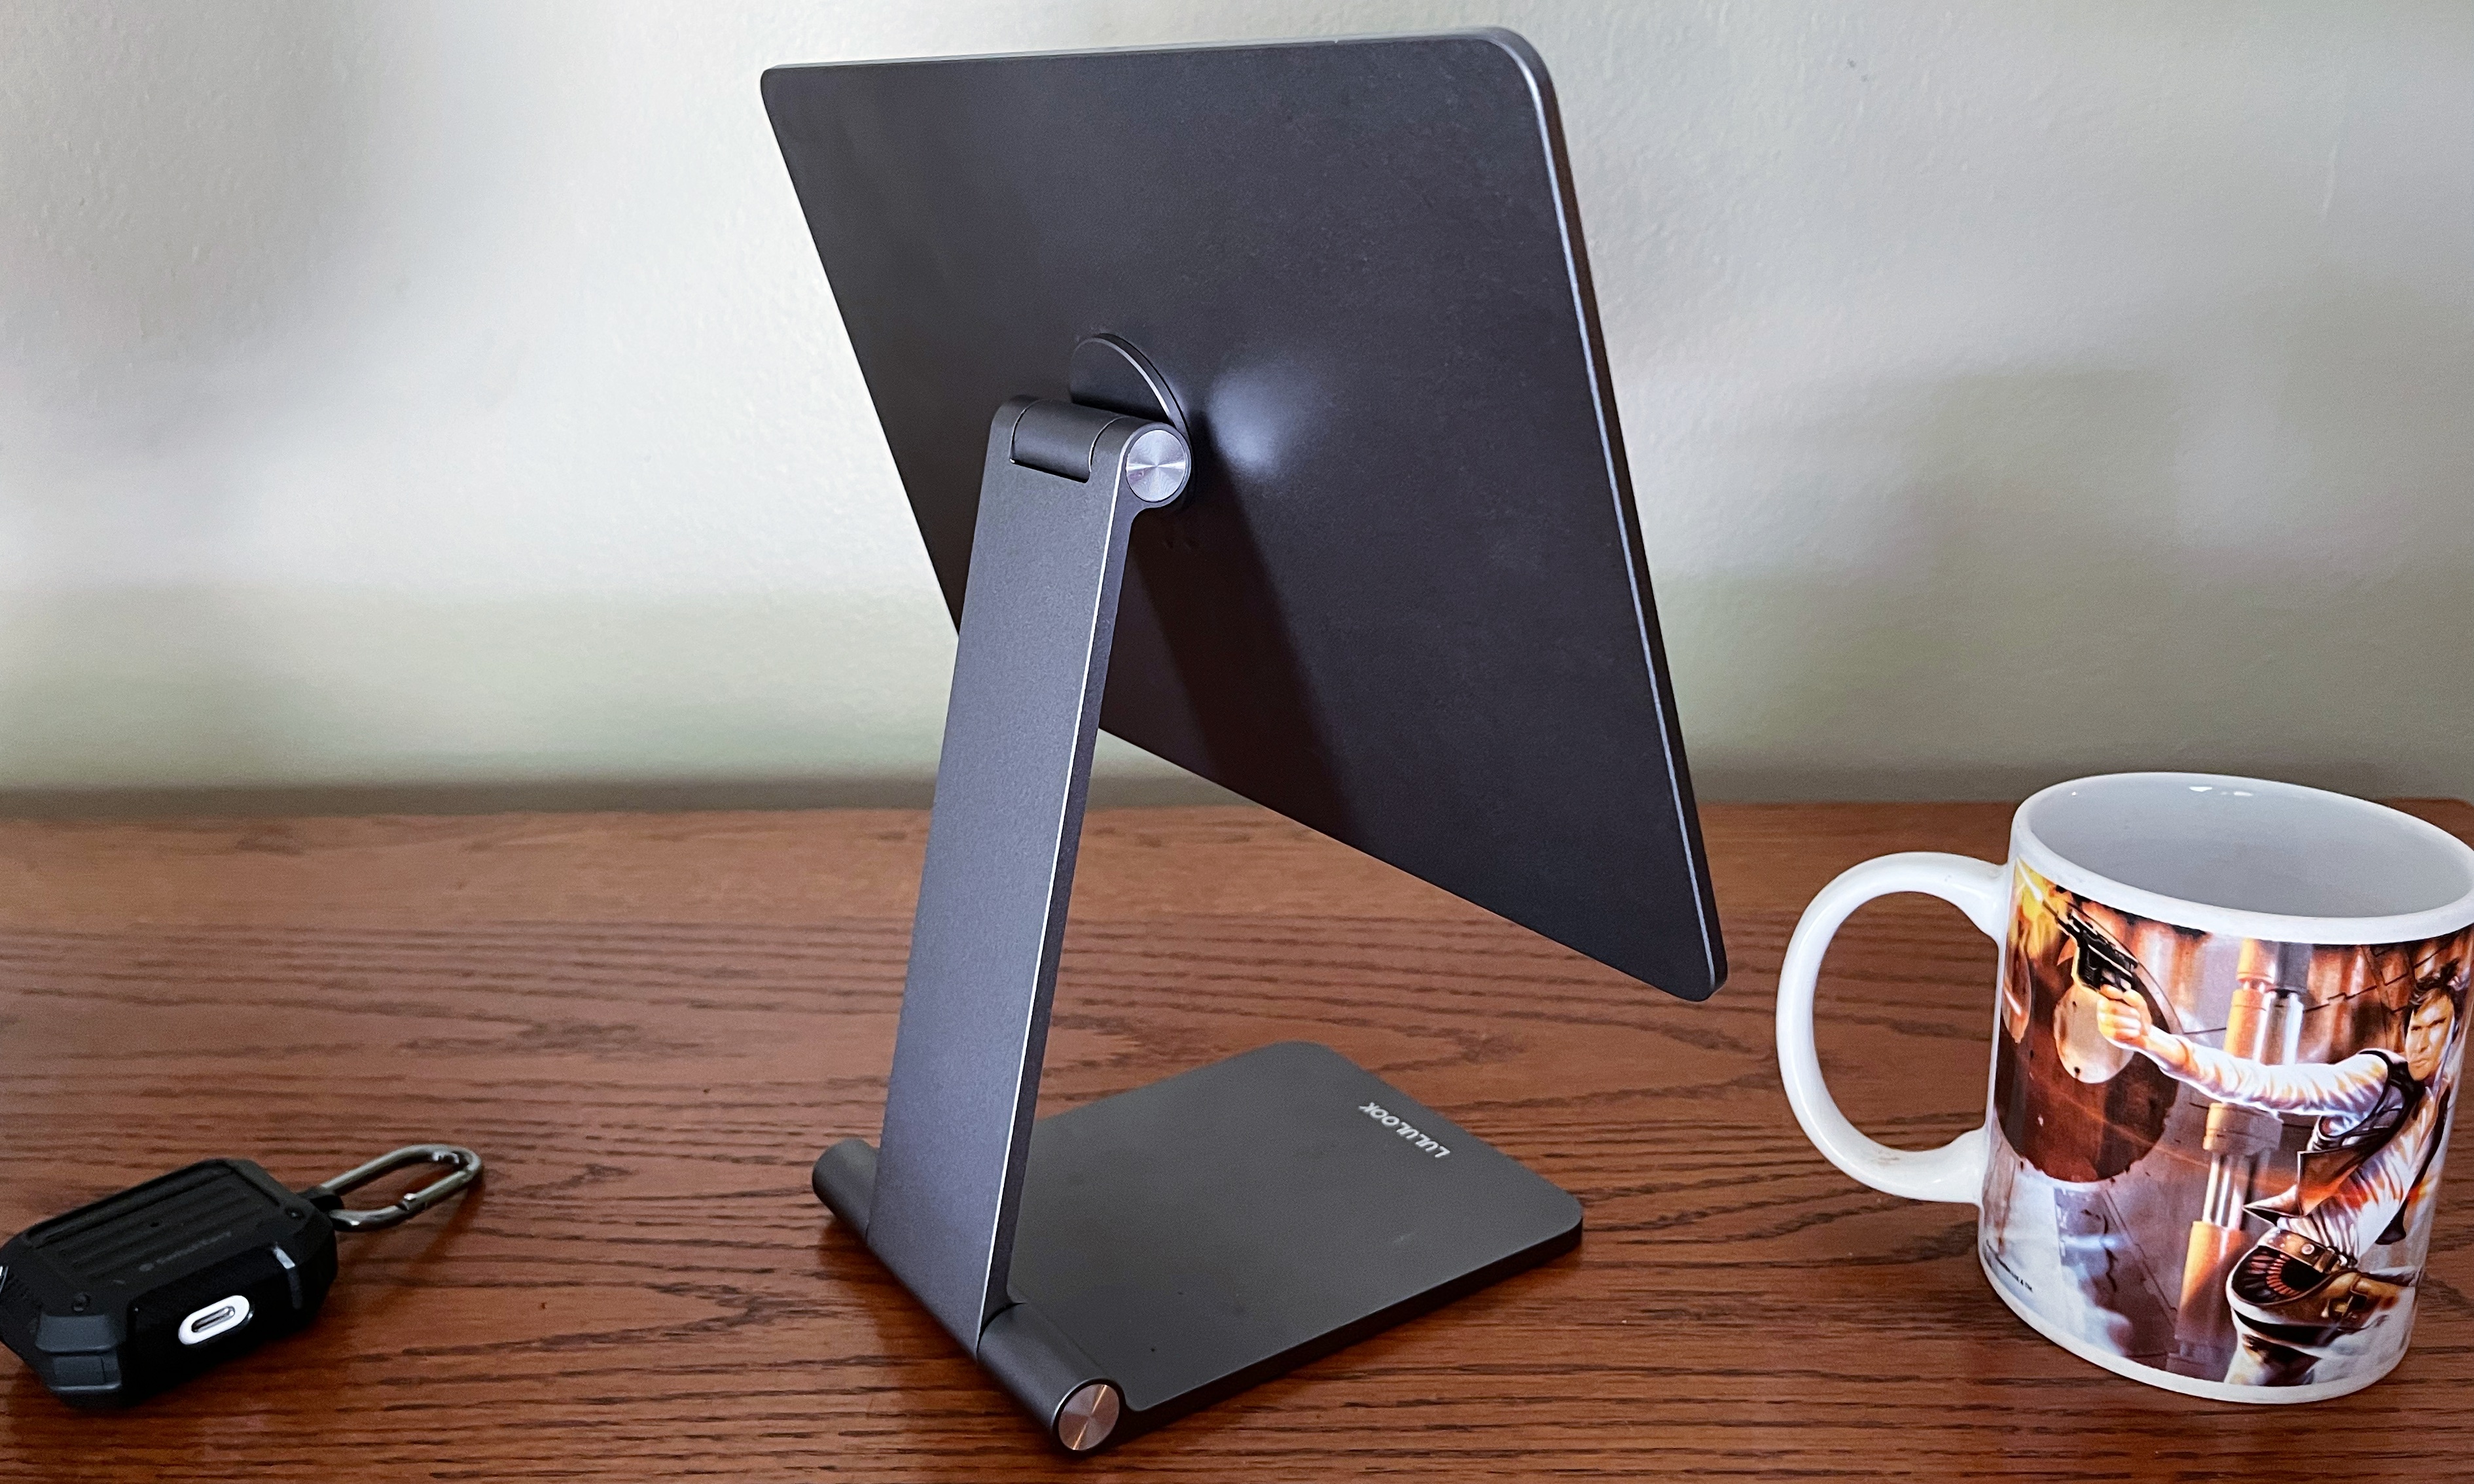 Lululook Foldable Magnetic iPad Stand without the iPad